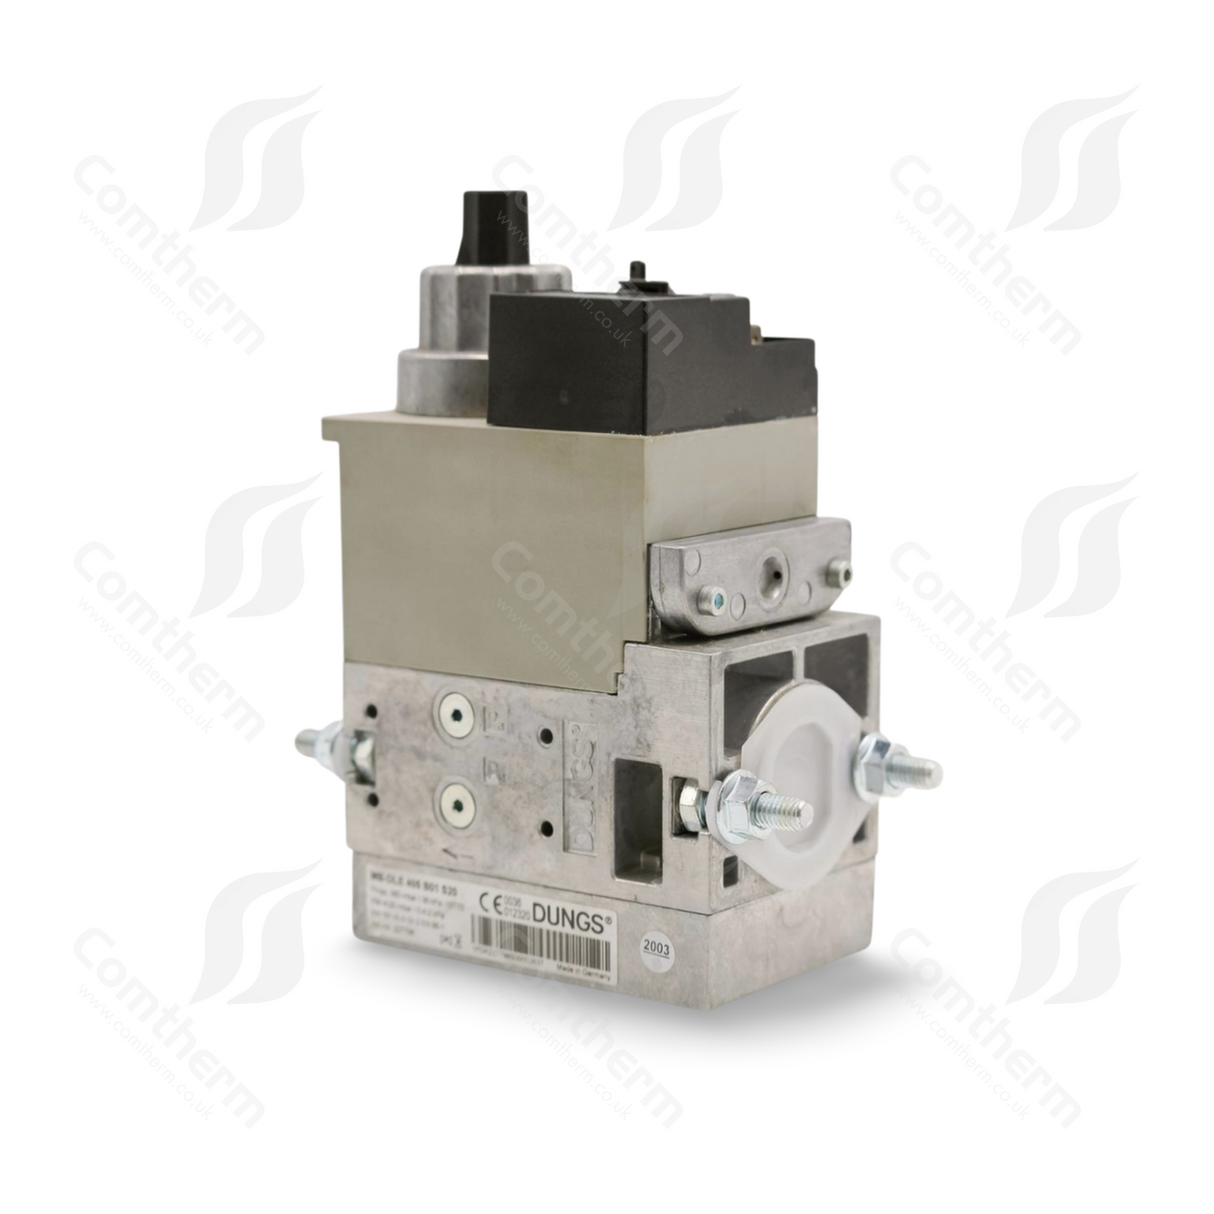 Dungs MB-DLE 412 B07 S20 Multibloc Gas Valve - 230v